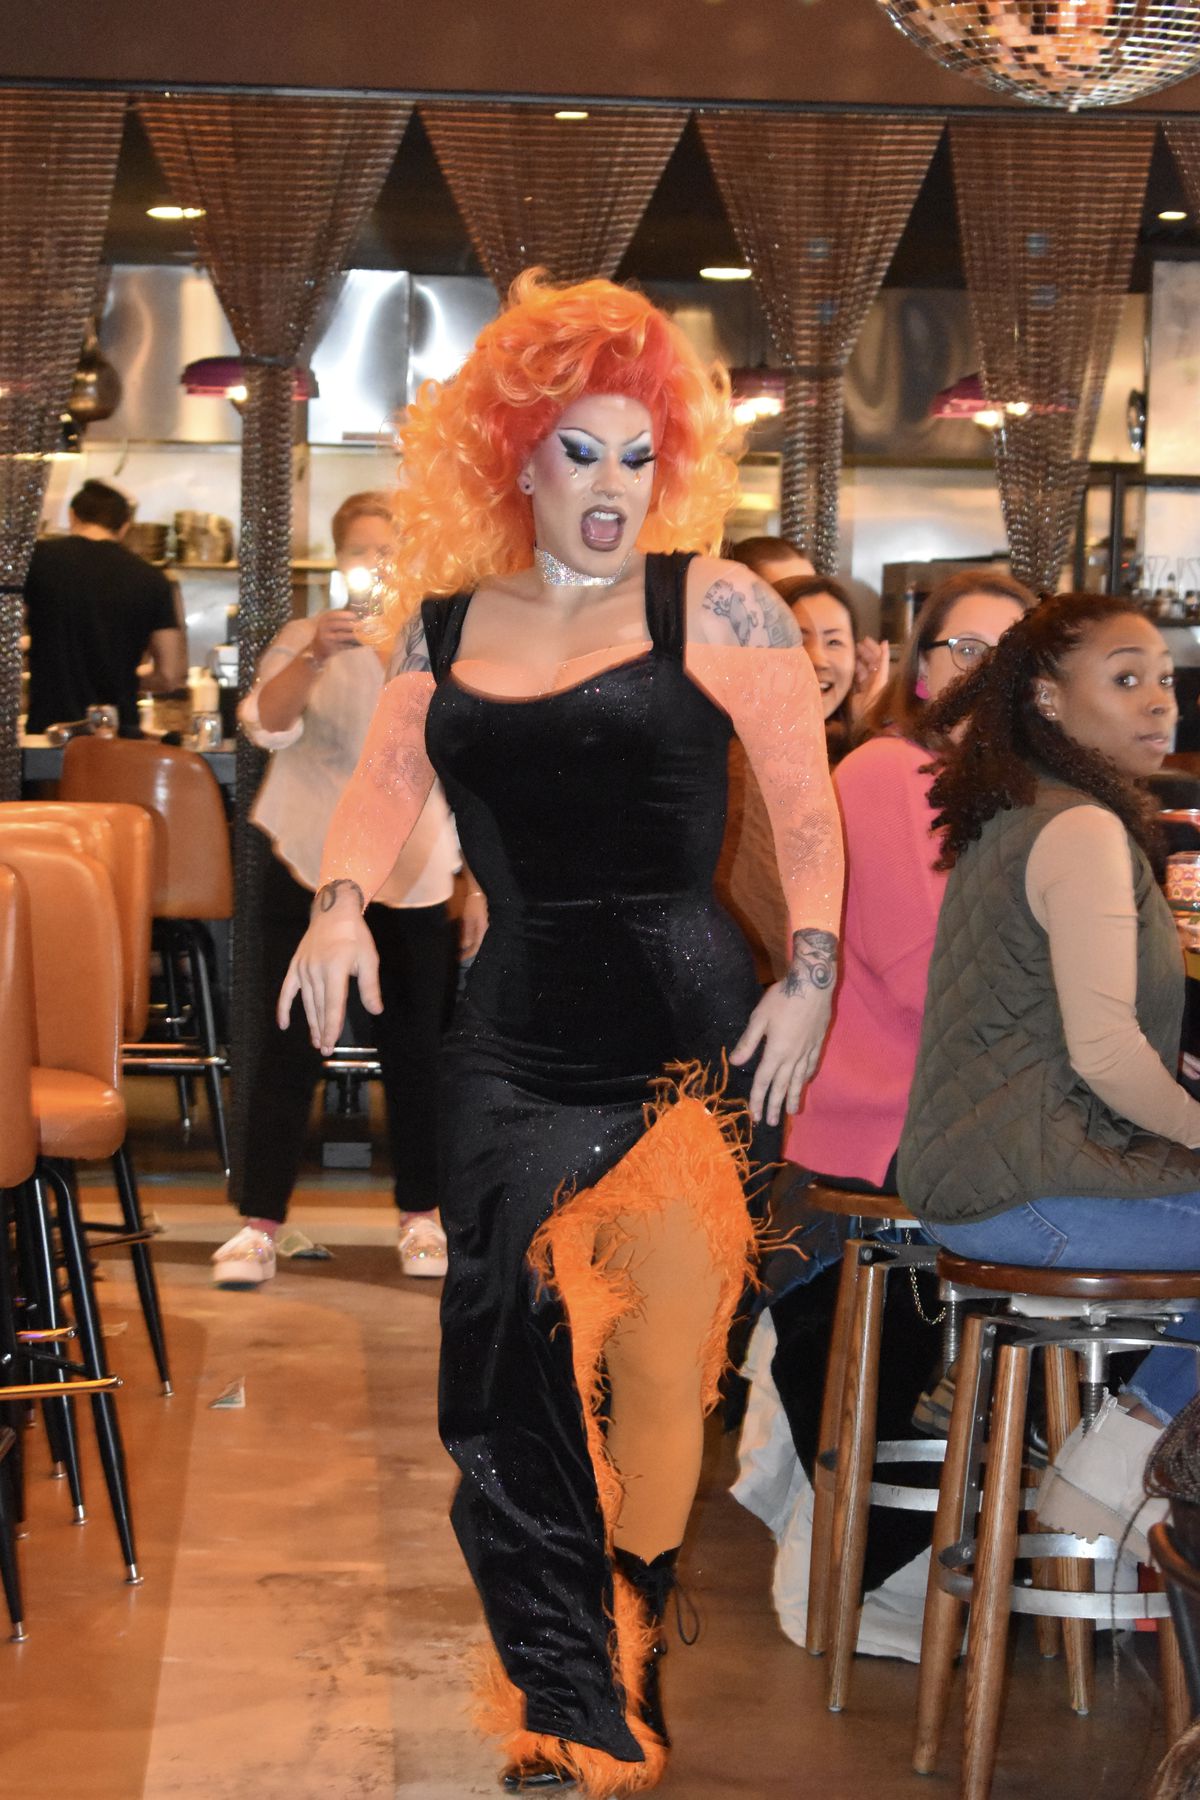 A drag performer in a bright orange wig and black and orange dress dances through a dining room.